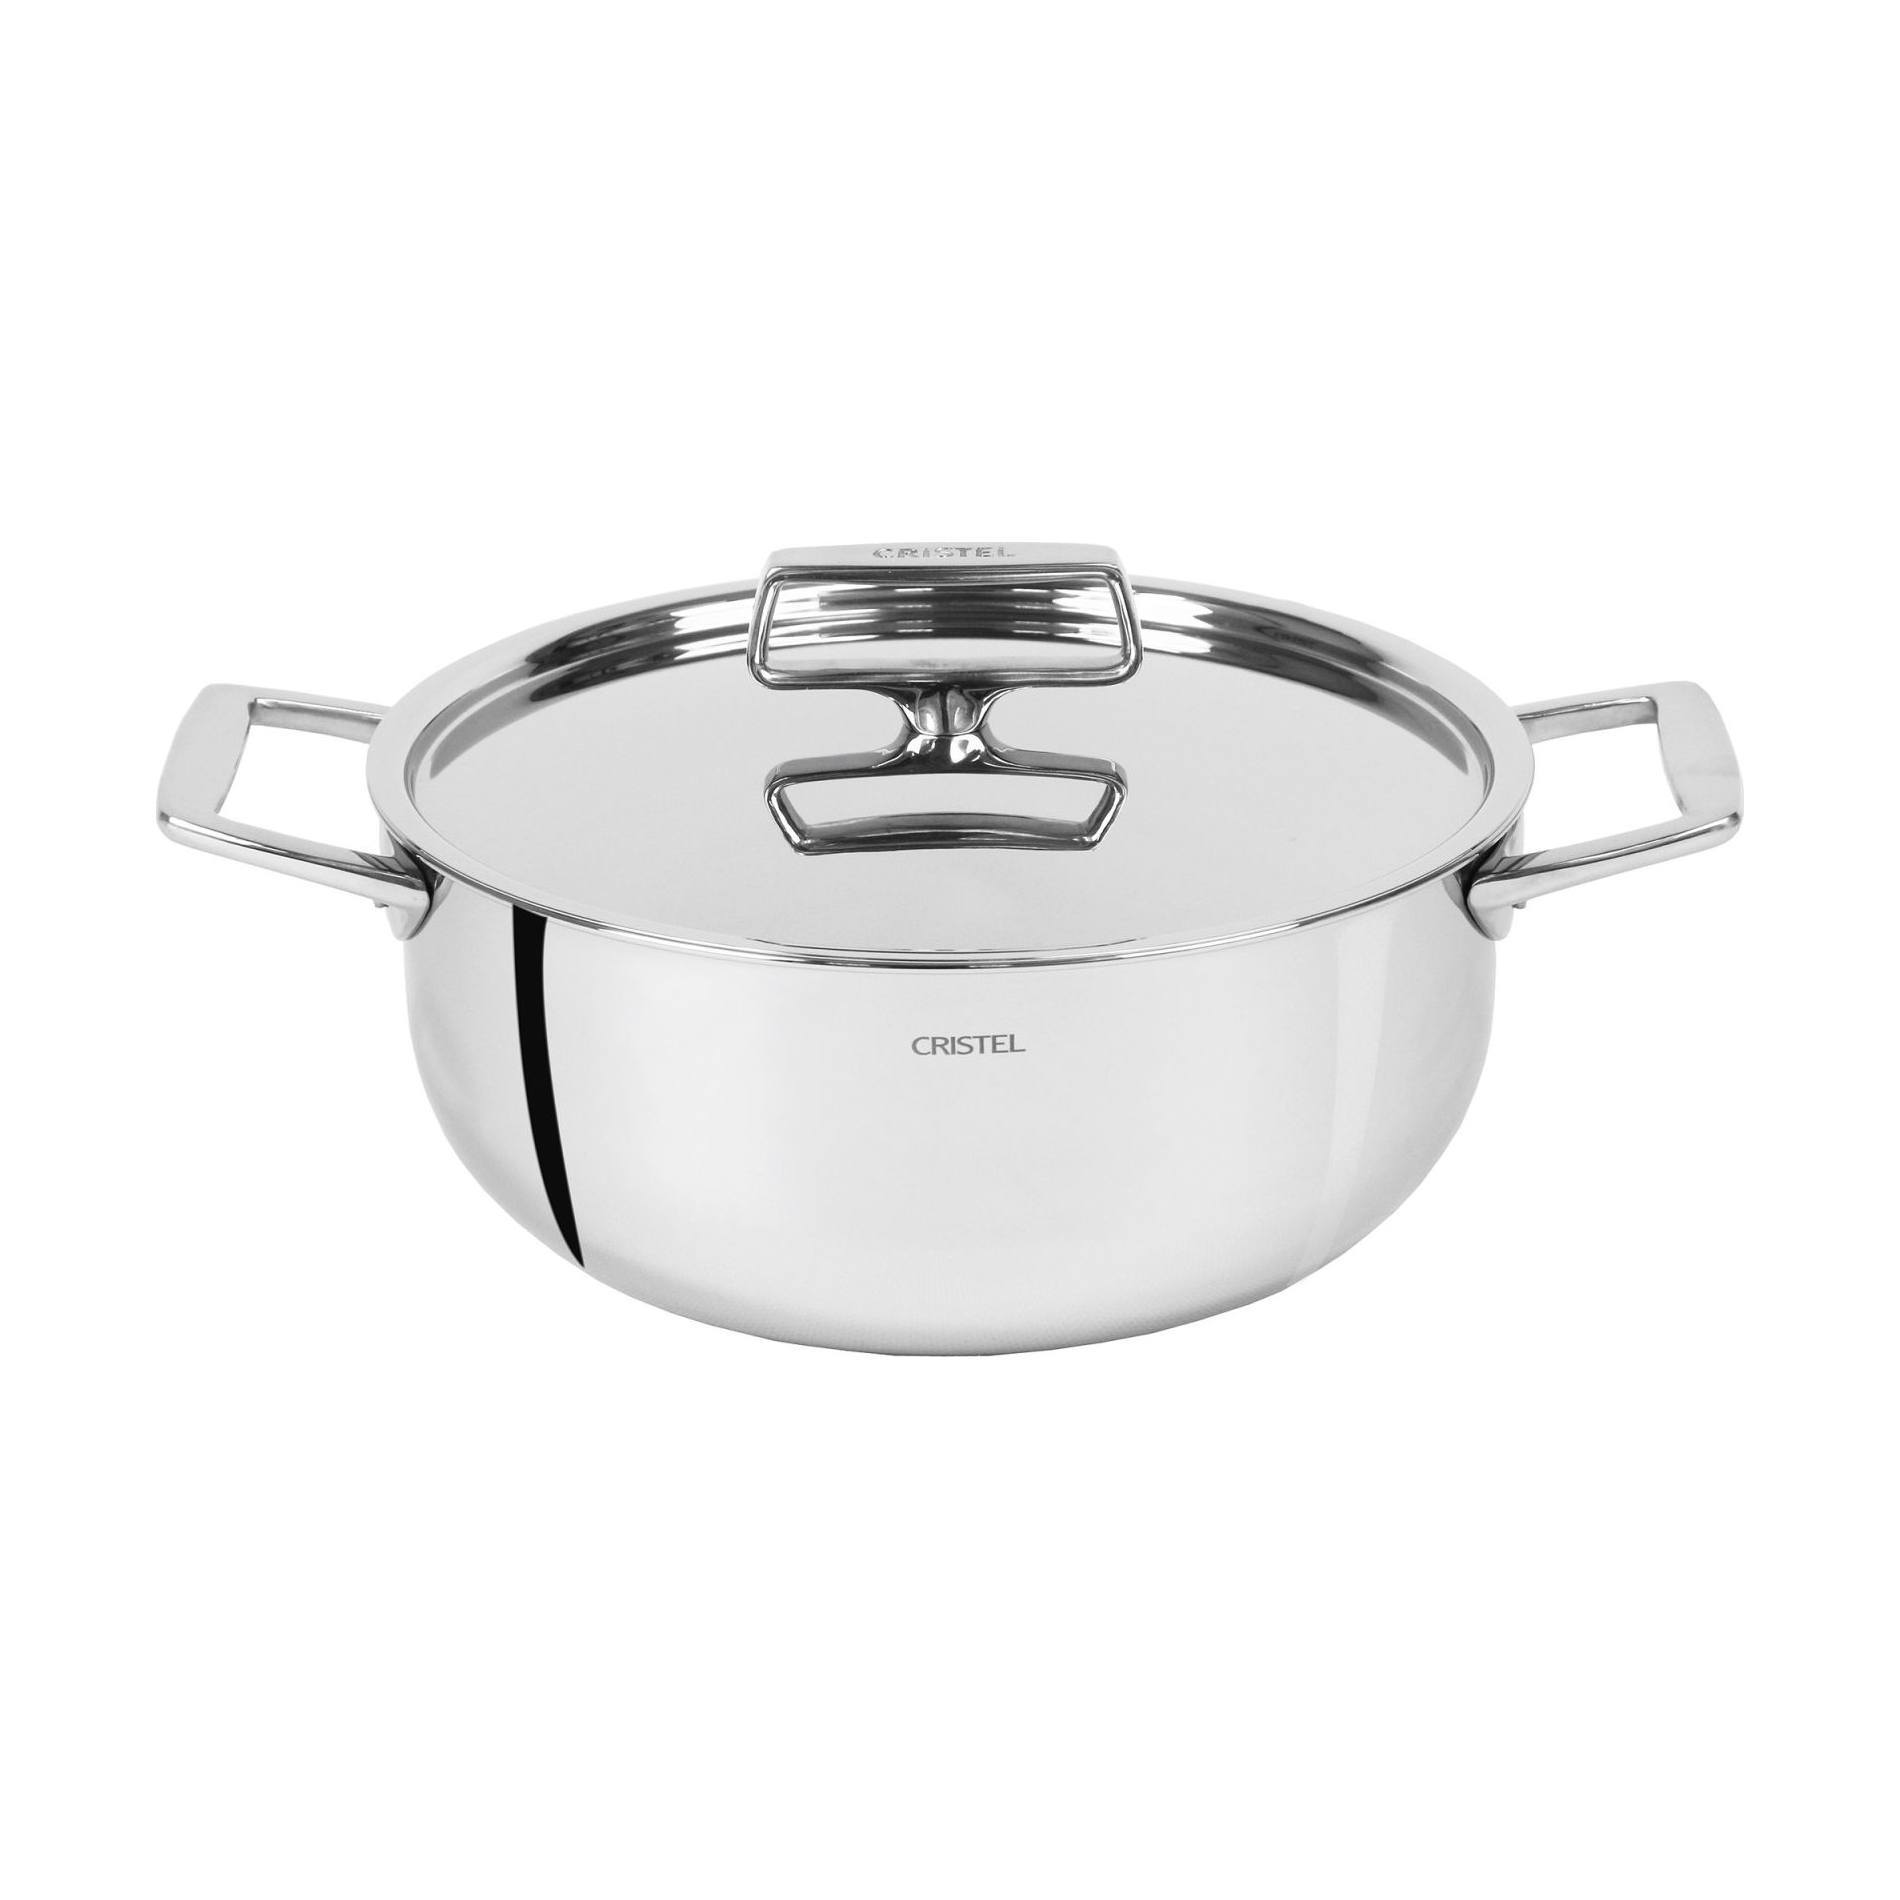 Castel Pro stewpan with lid 16 cm stainless steel Cristel